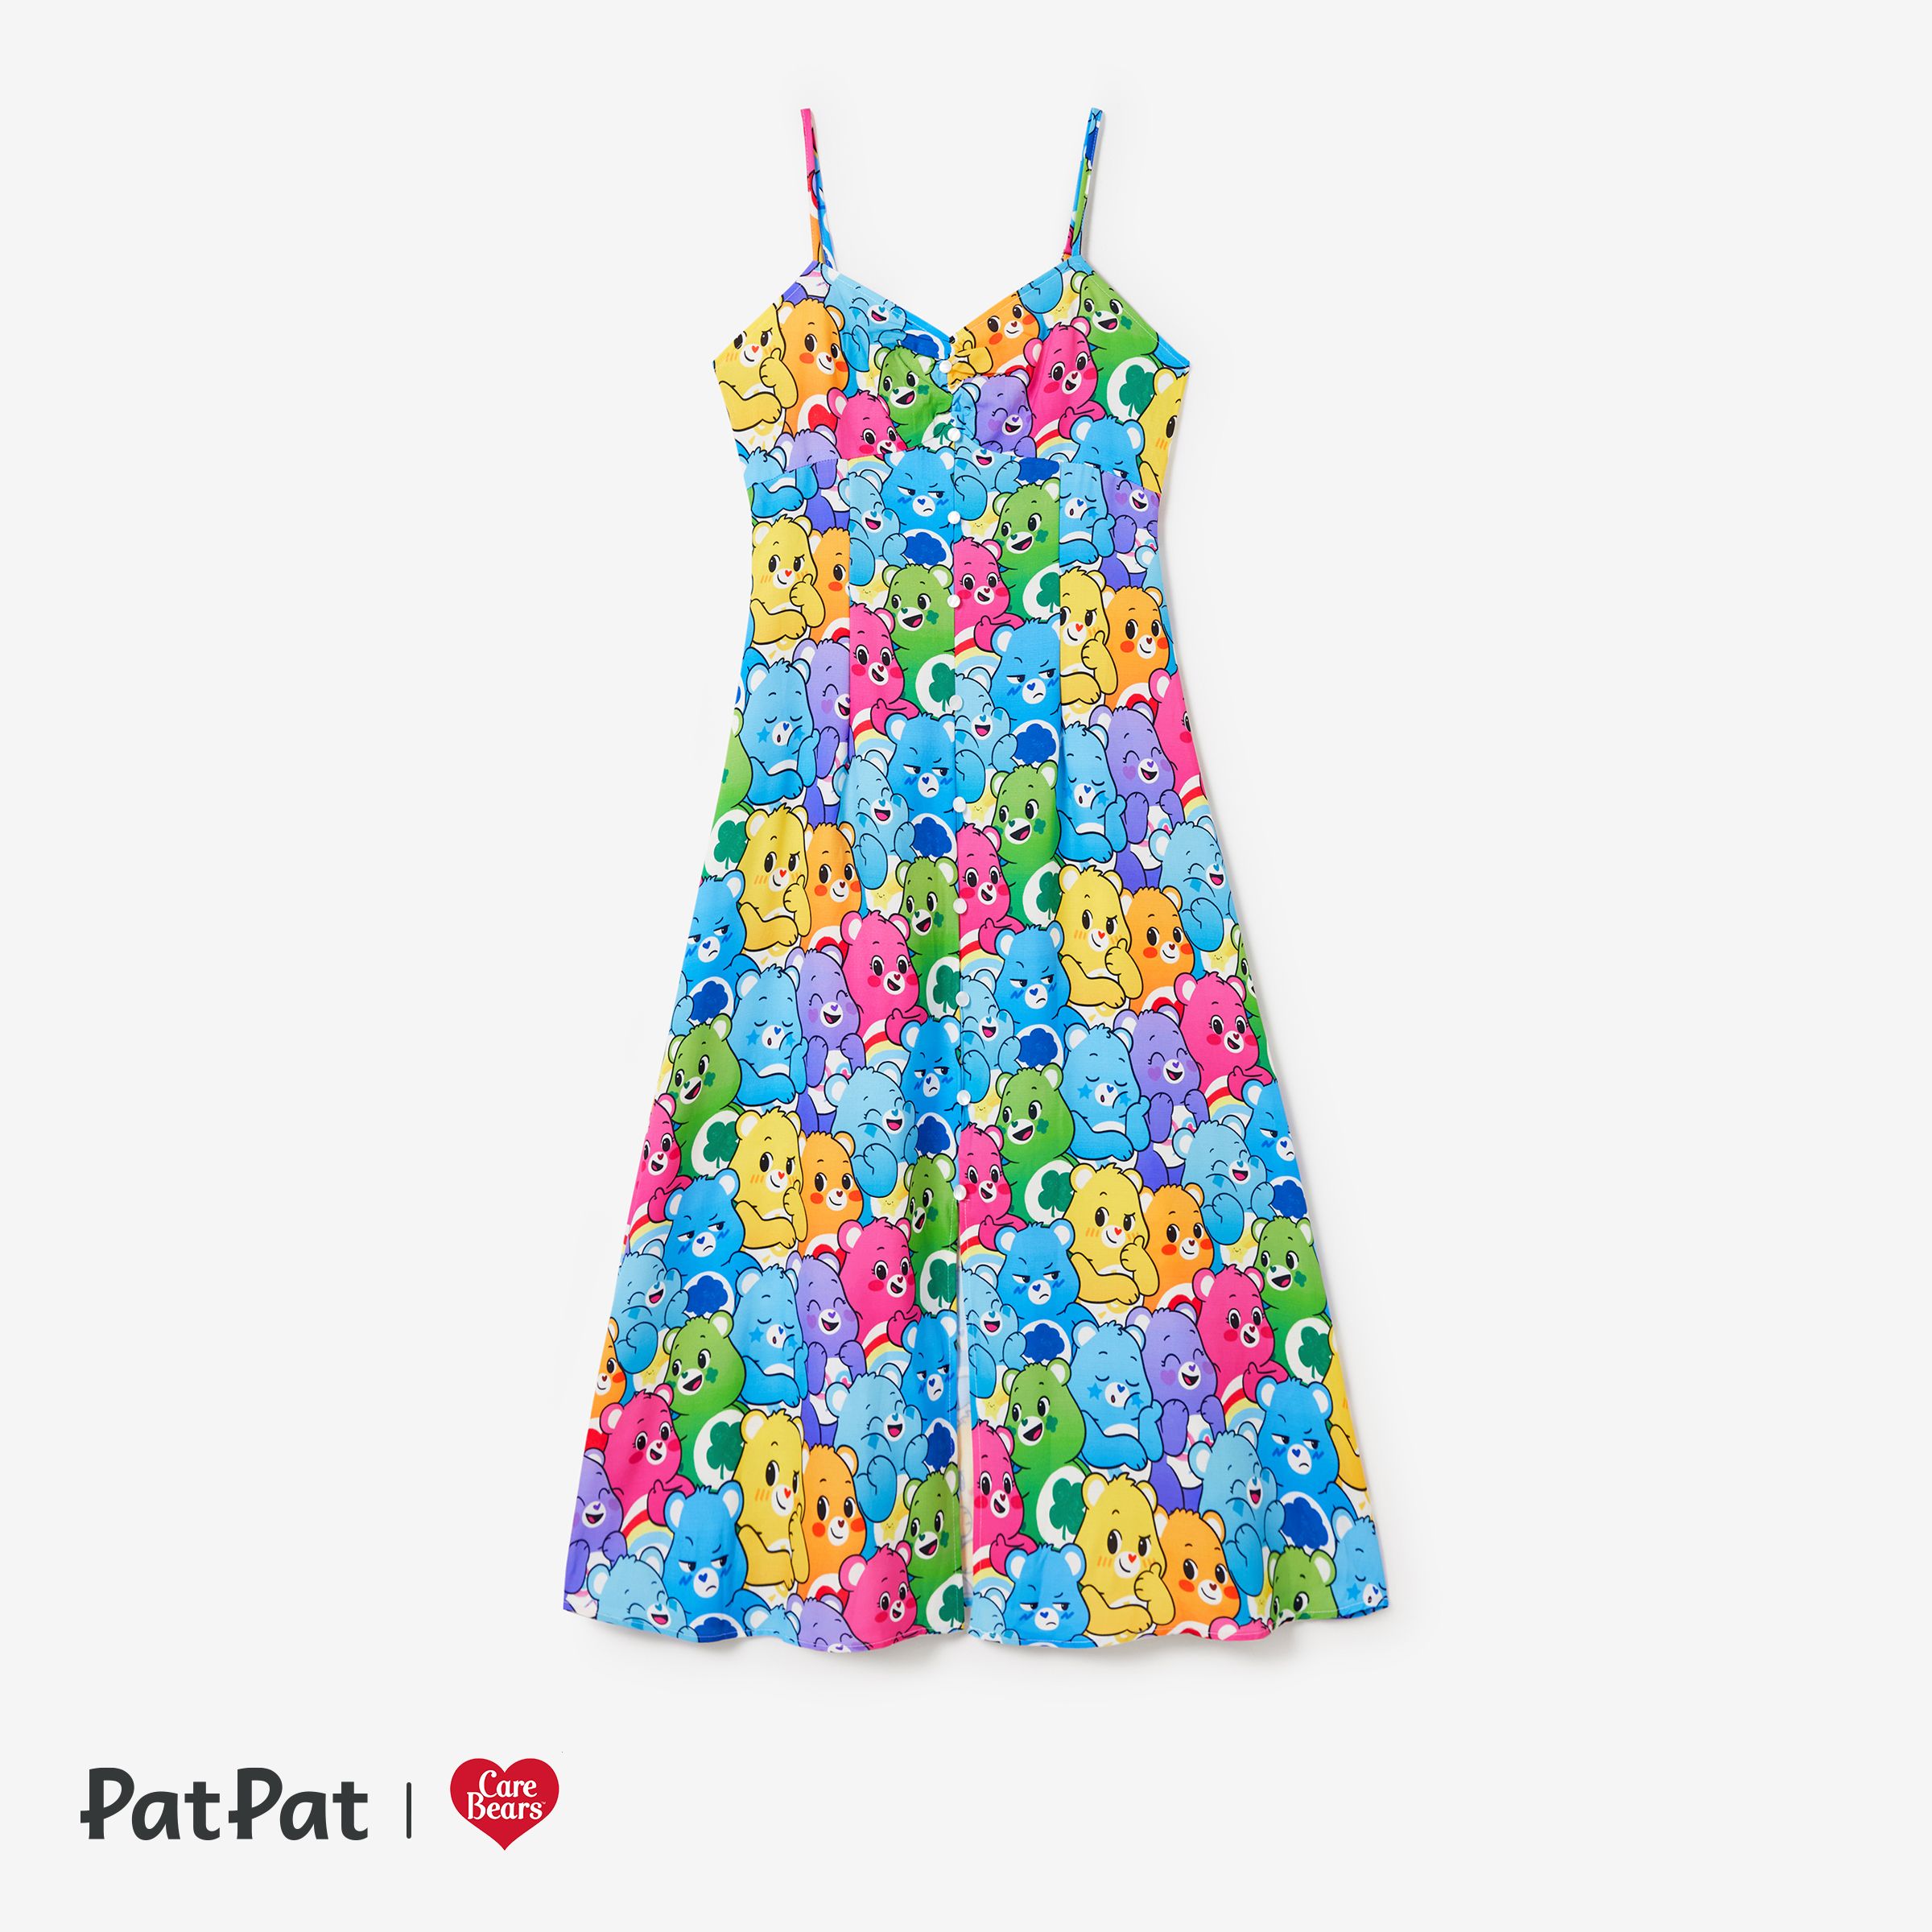 

Care Bears Family Matching Colorful Character All-over Print Sleeveless Dress/Cotton Tee/Romper